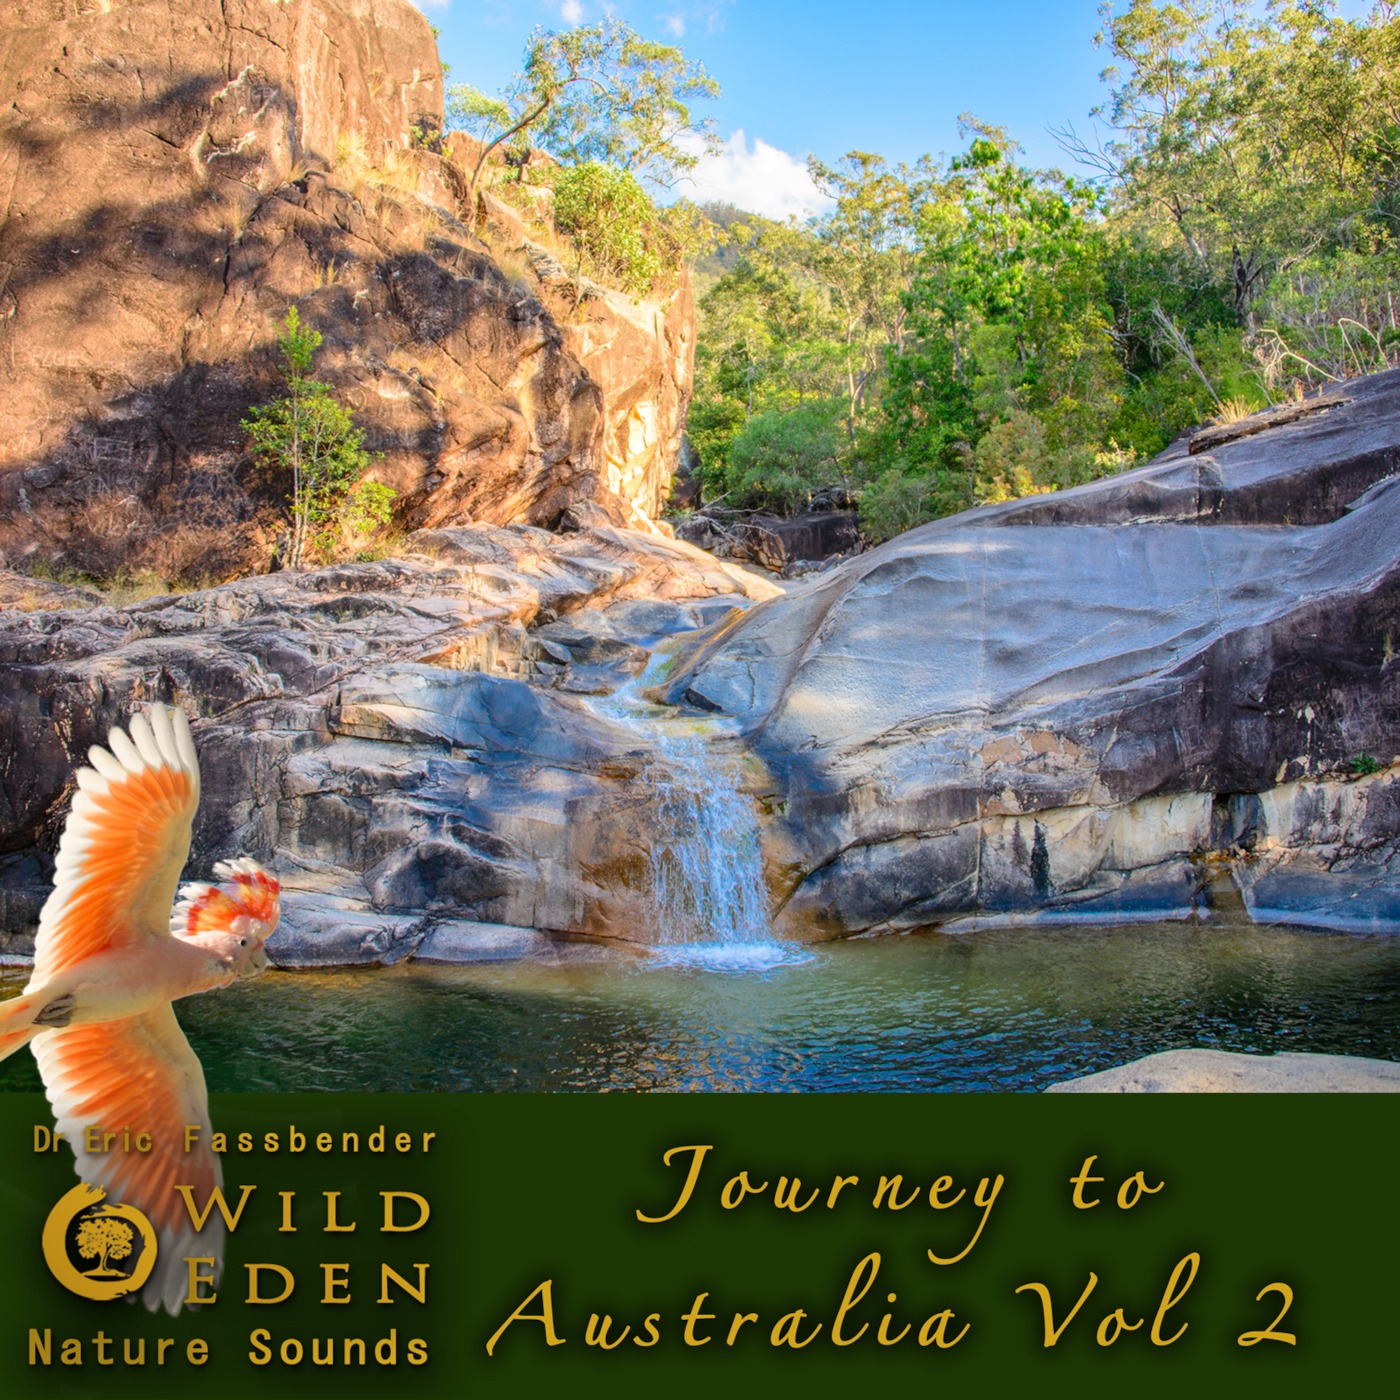 Episode 10 - Morning Birds and Crickets at Big Horse Creek - Track 3 - Album - Journey to Australia Vol.2